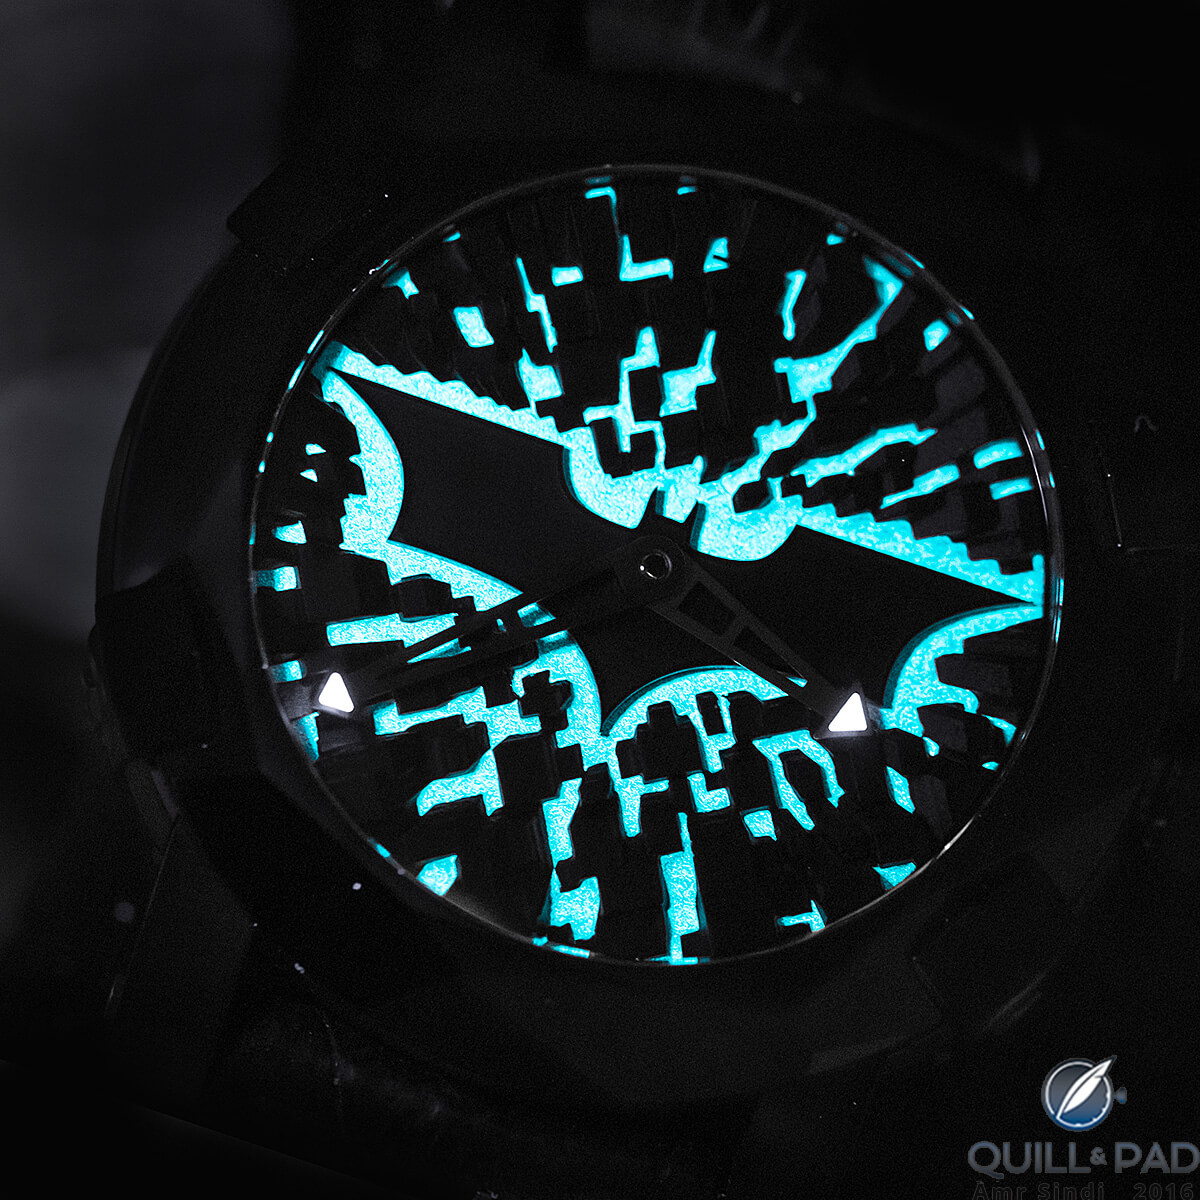 Romain Jerome's Batman-DNA Gotham City lights up with lume by night